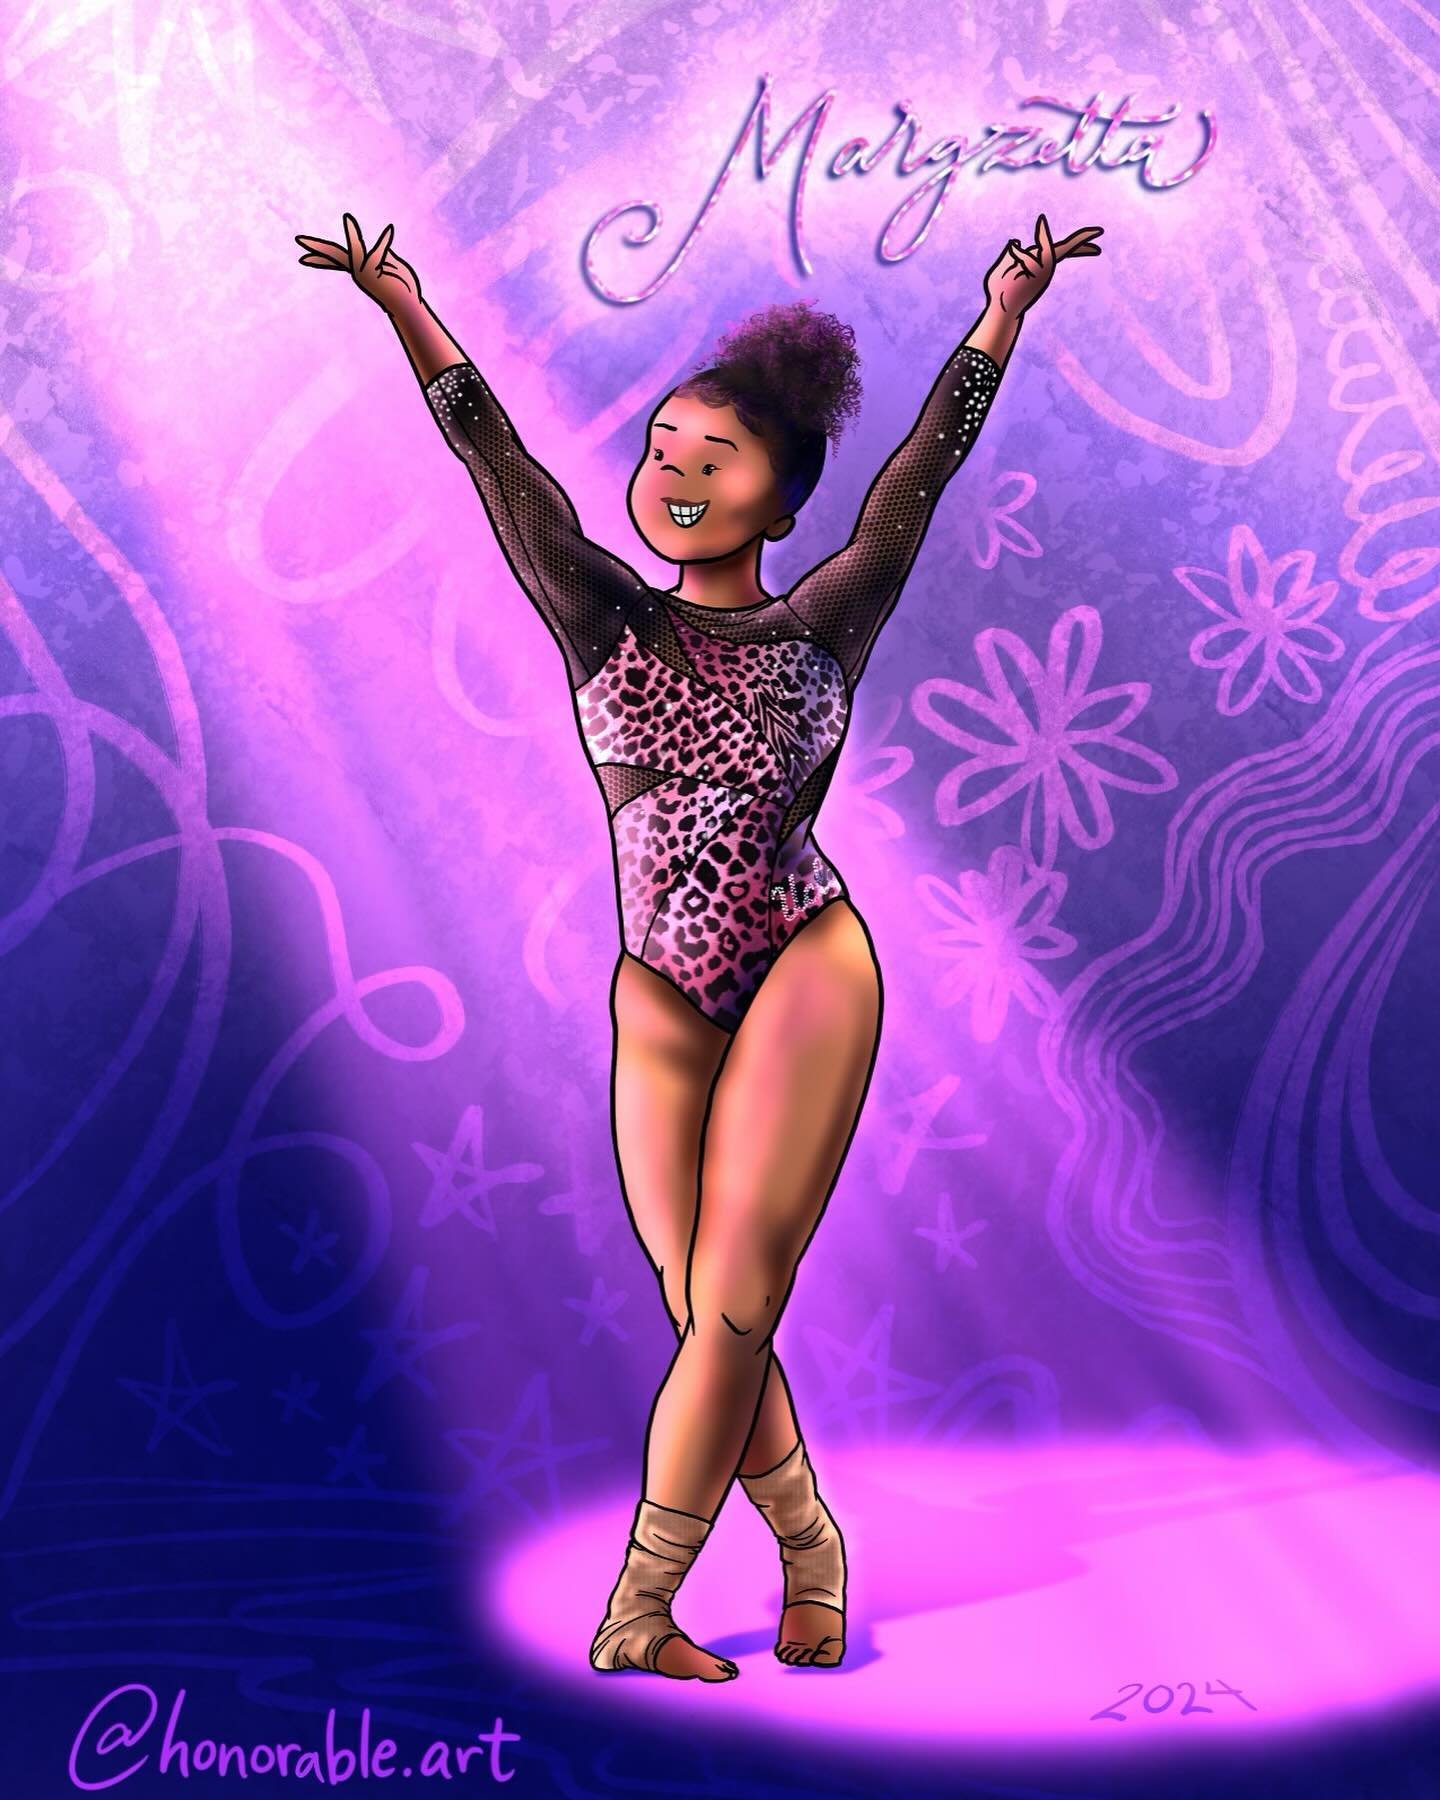 I wanted to draw this for the ✨ICON✨ @margzetta in her stunning @sylviapteamwear leo!
&bull;
#uclagymnastics #margzettafrazier #sylviap #sylviapteamwear #gymnastics #collegegymnastics #gymnasticsleotard #pink @uclagymnastics @sylviapteamwear @sylviap